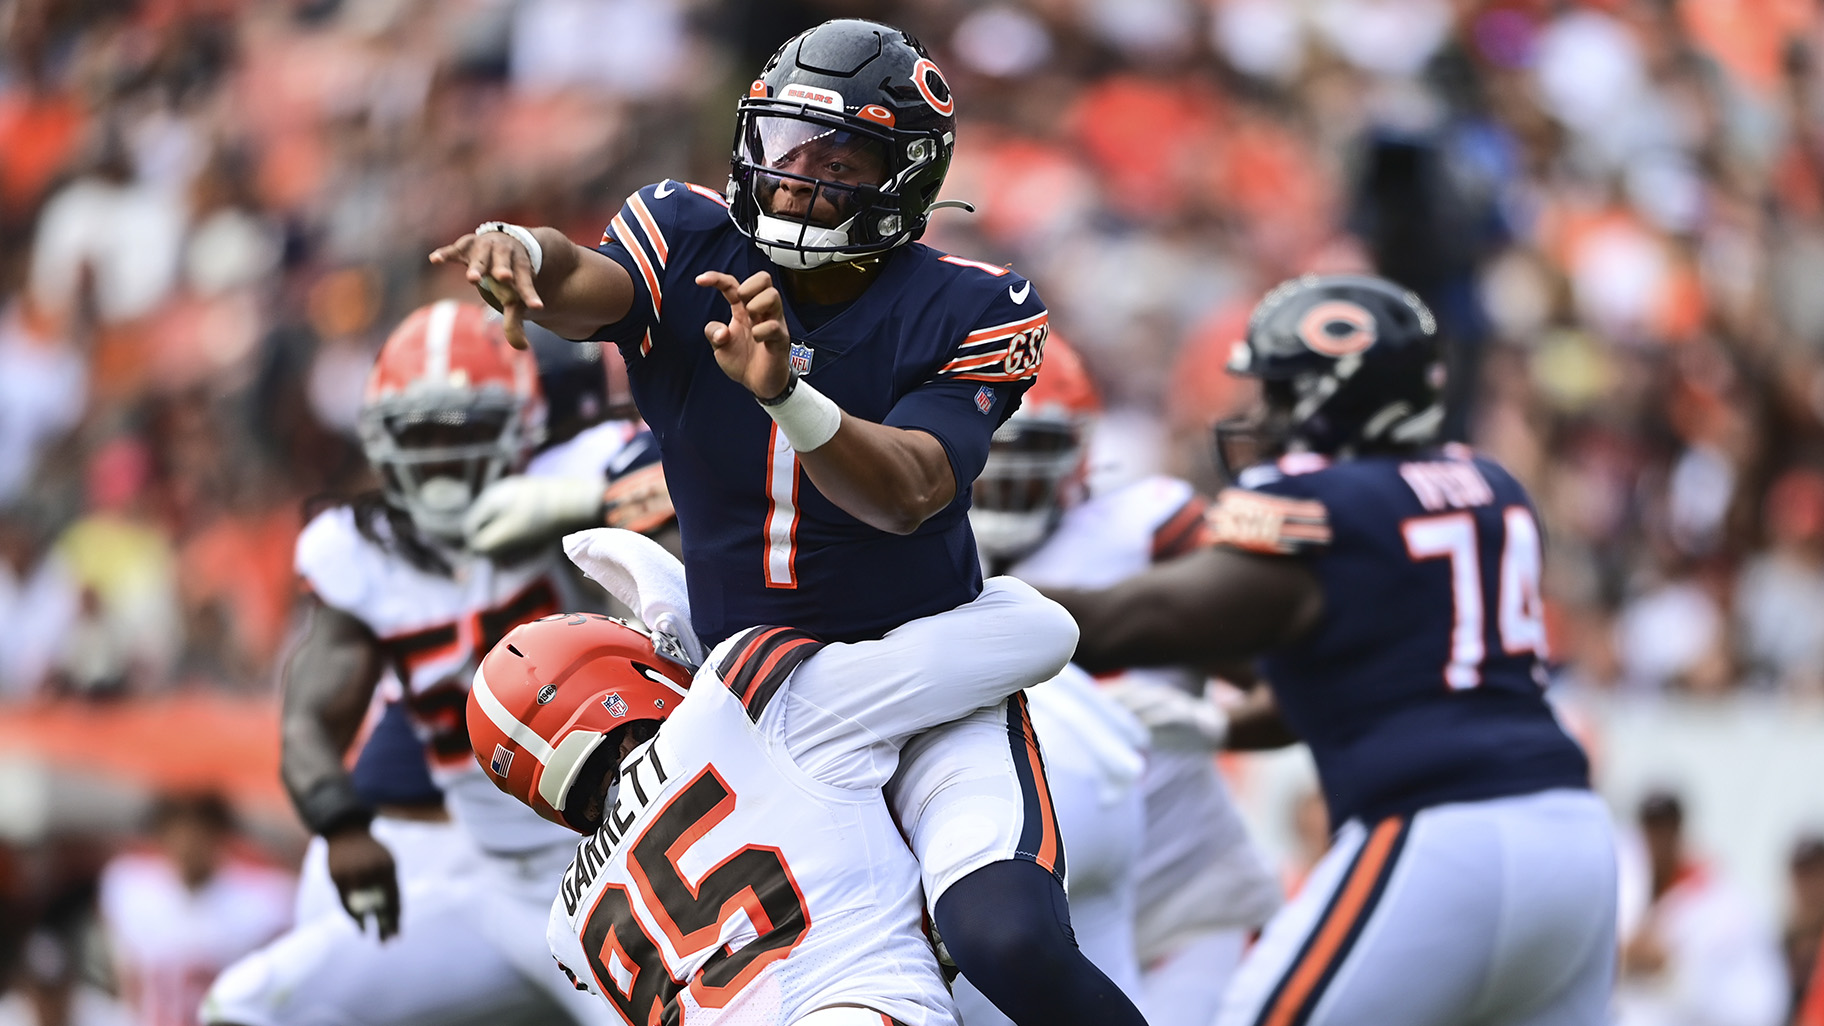 How to watch, listen to Chicago Bears at Cleveland Browns